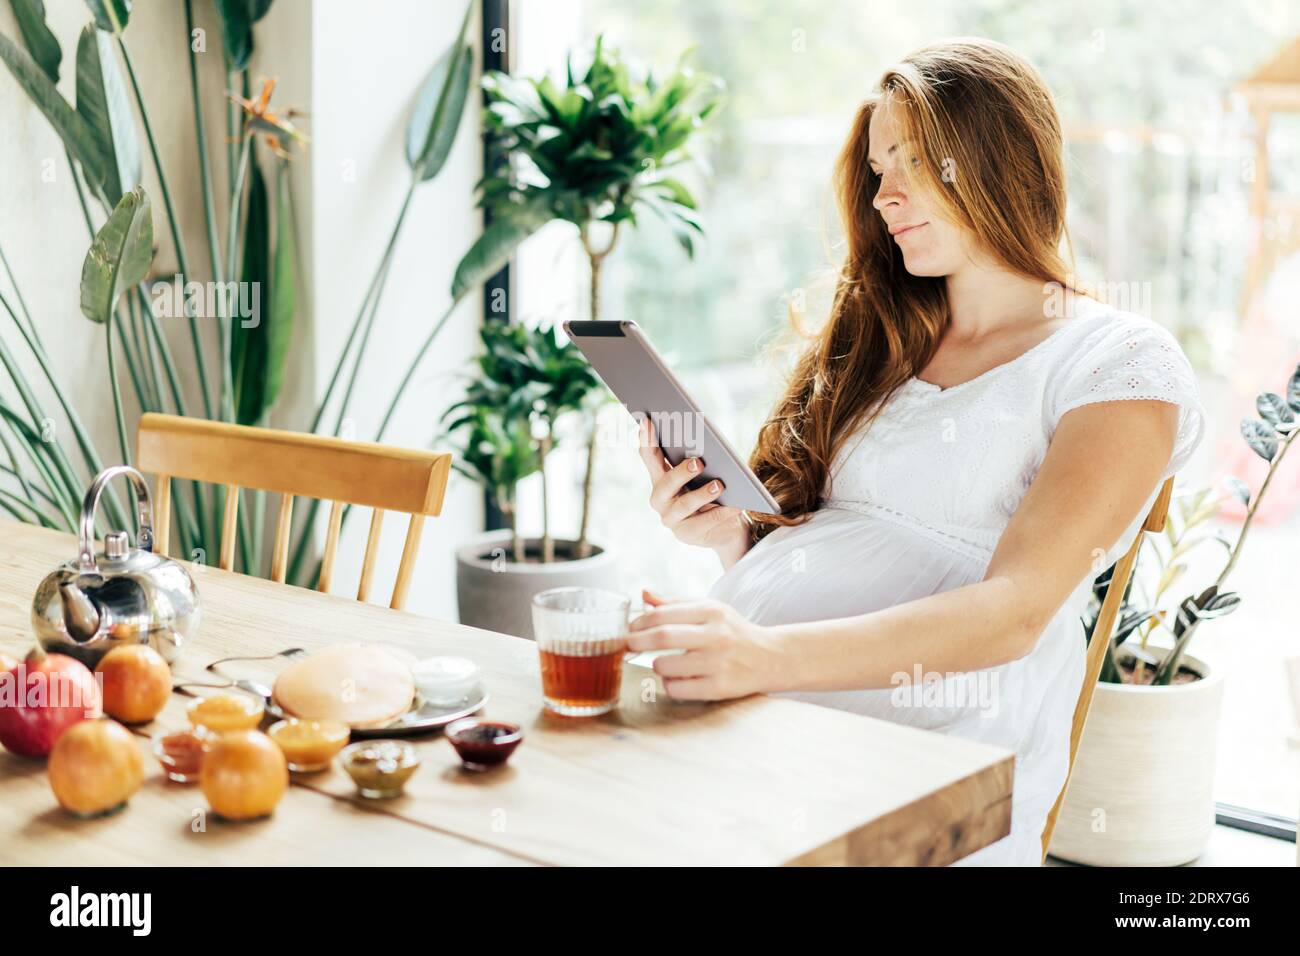 A pregnant woman is eating breakfast at the table and looking into a tablet. Stock Photo